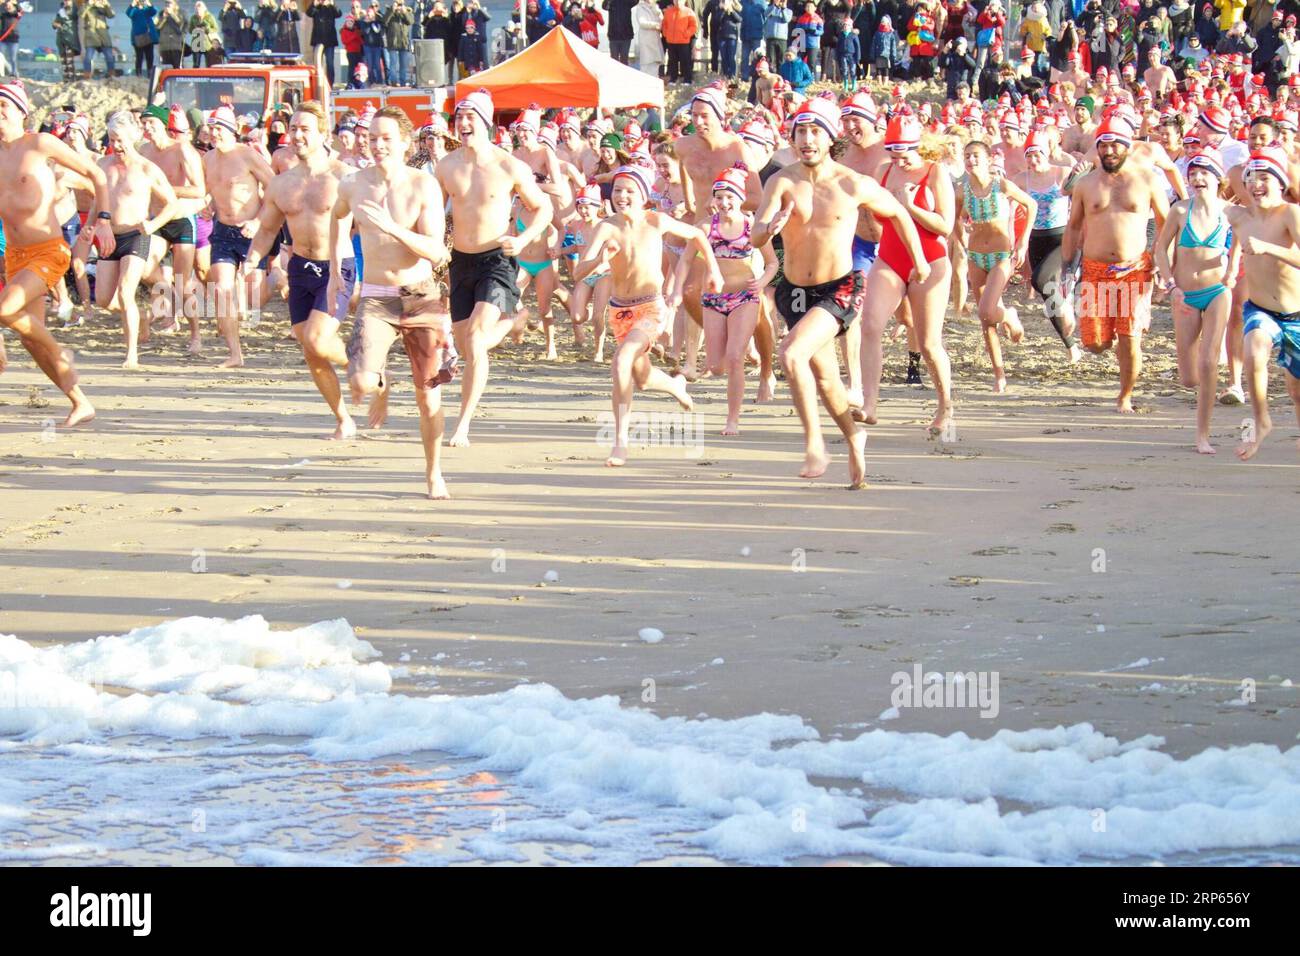 (190102) -- BEIJING, Jan. 2, 2019 -- People swarm into the sea during a traditional New Year s Dip event to celebrate the beginning of the New Year in Bloemendaal aan Zee, the Netherlands, on Jan. 1, 2019. ) XINHUA PHOTOS OF THE DAY XINHUA PHOTOS OF THE DAY SylviaxLederer PUBLICATIONxNOTxINxCHN Stock Photo